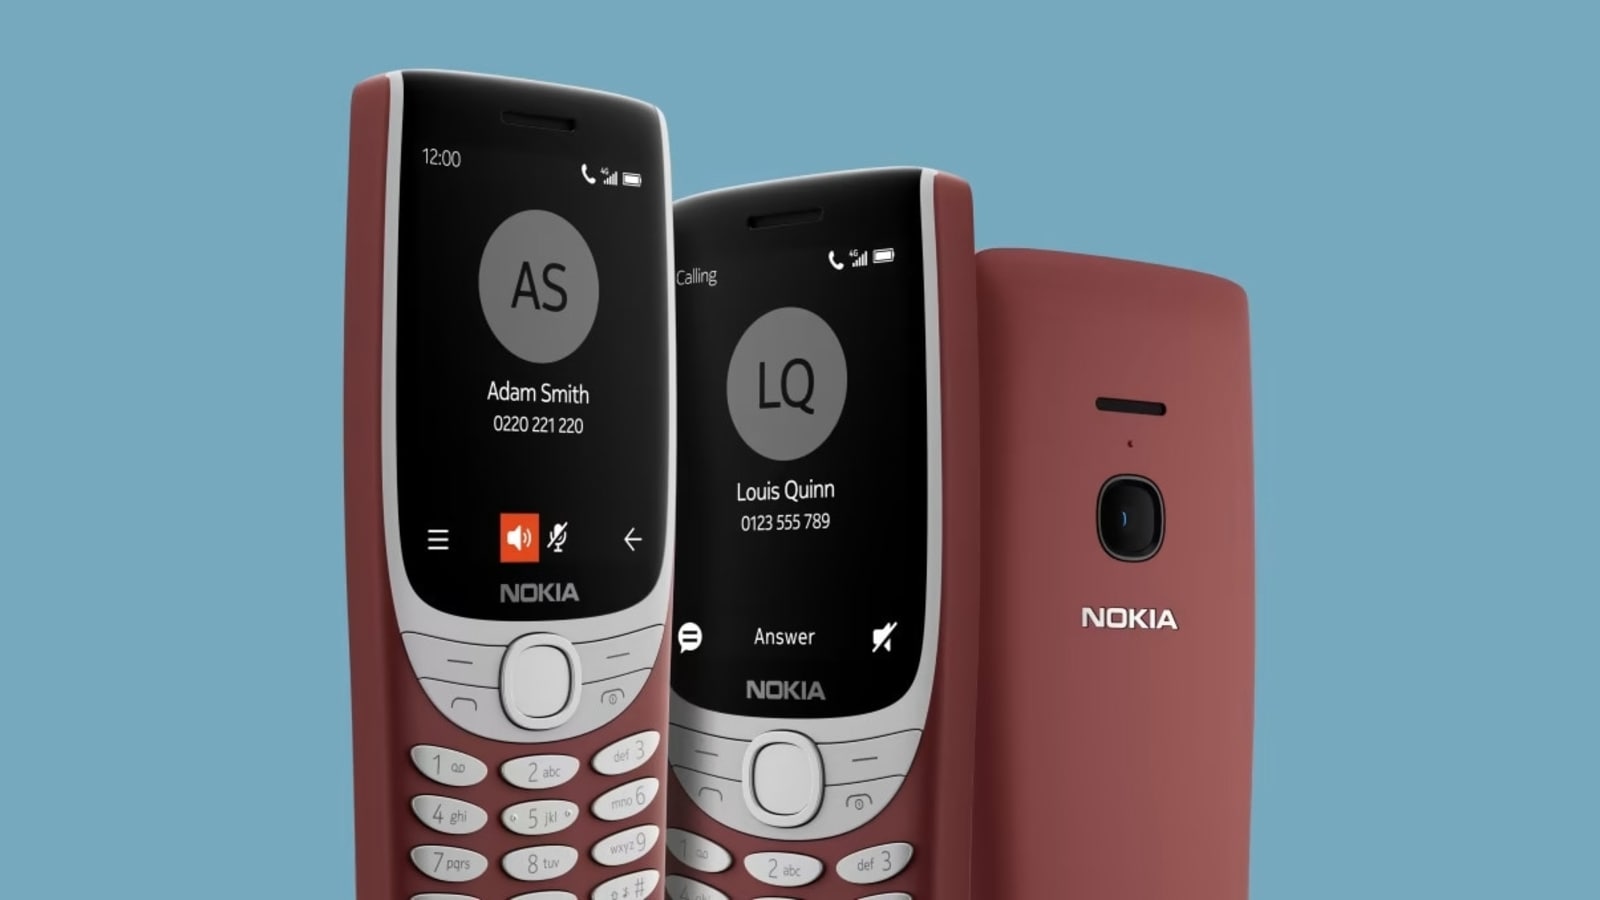 Nokia 8210 4G review: A good feature phone with mix of old and new features